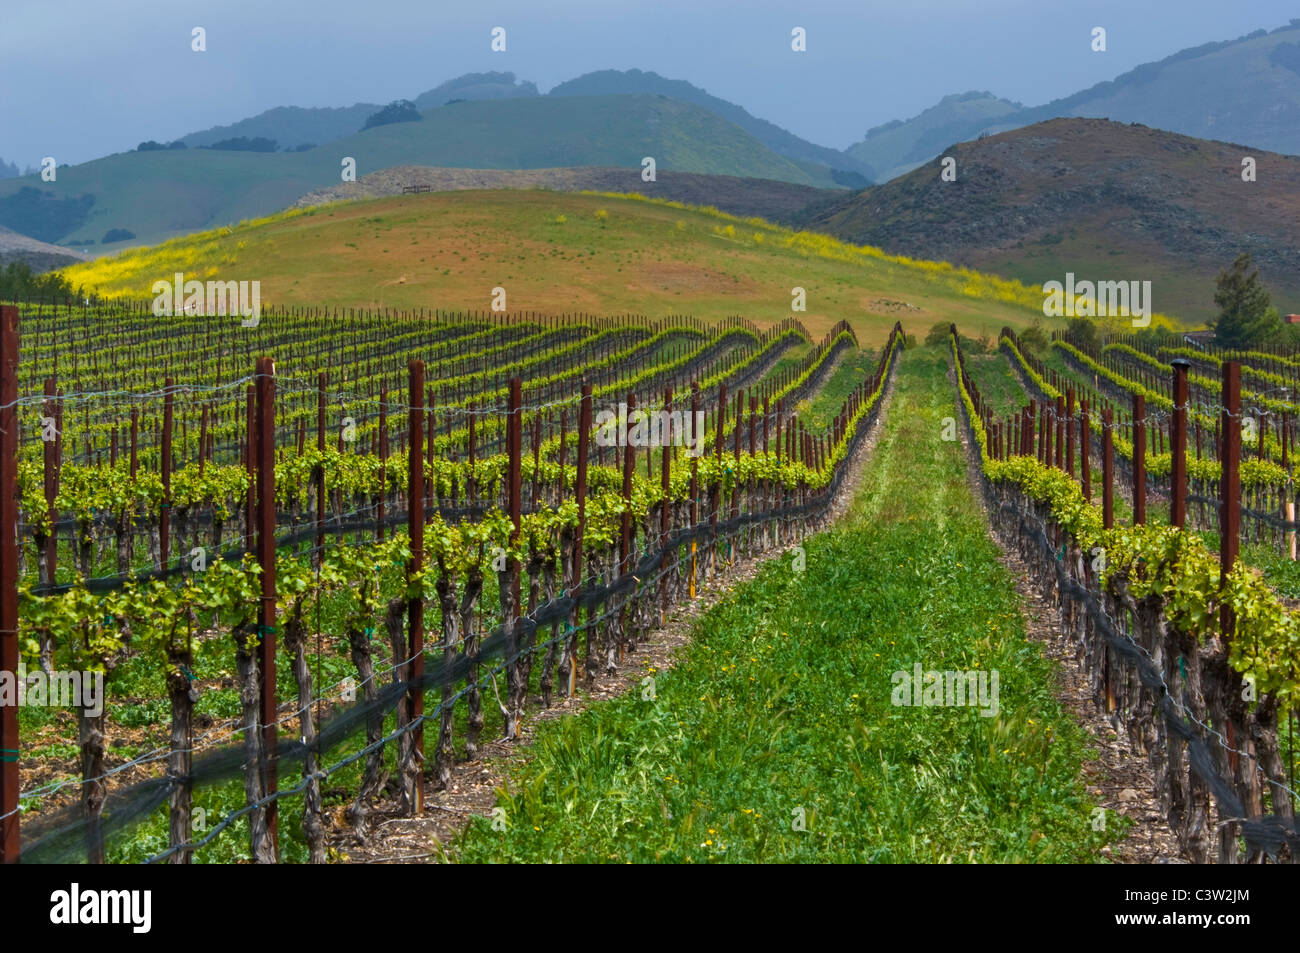 Rows of wine grape vines in vineyard and green hills in Spring, Edna Valley, San Luis Obispo County, California Stock Photo